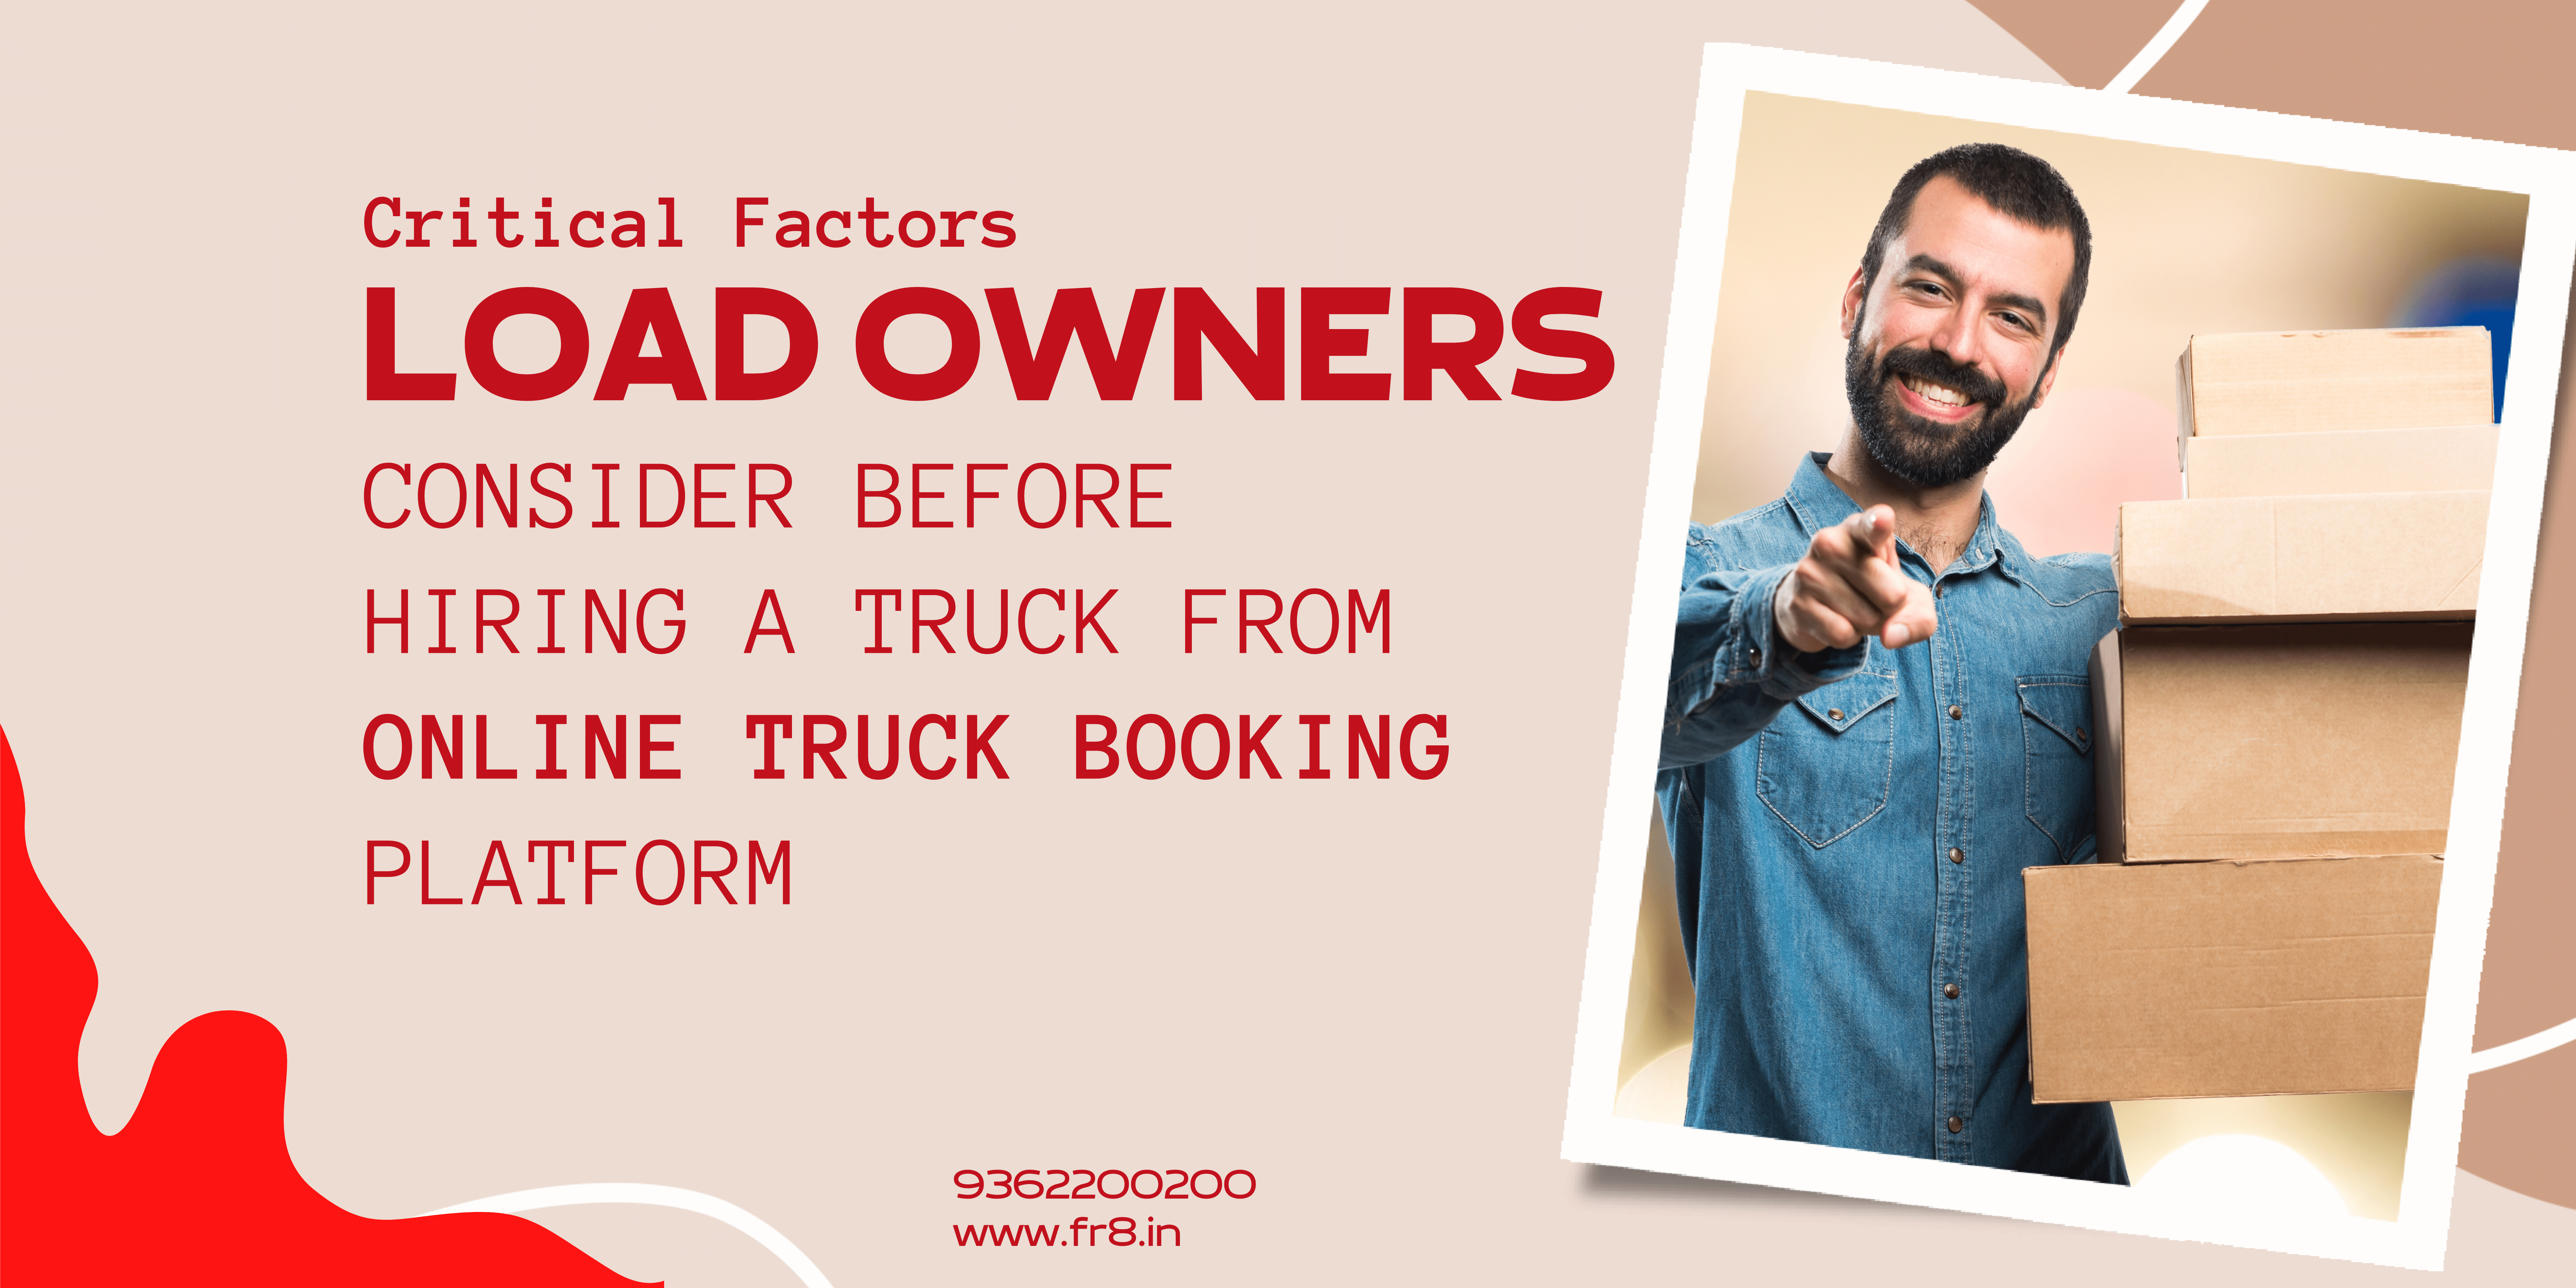 Critical factors should load owners consider before hiring a truck from an online truck booking platform?